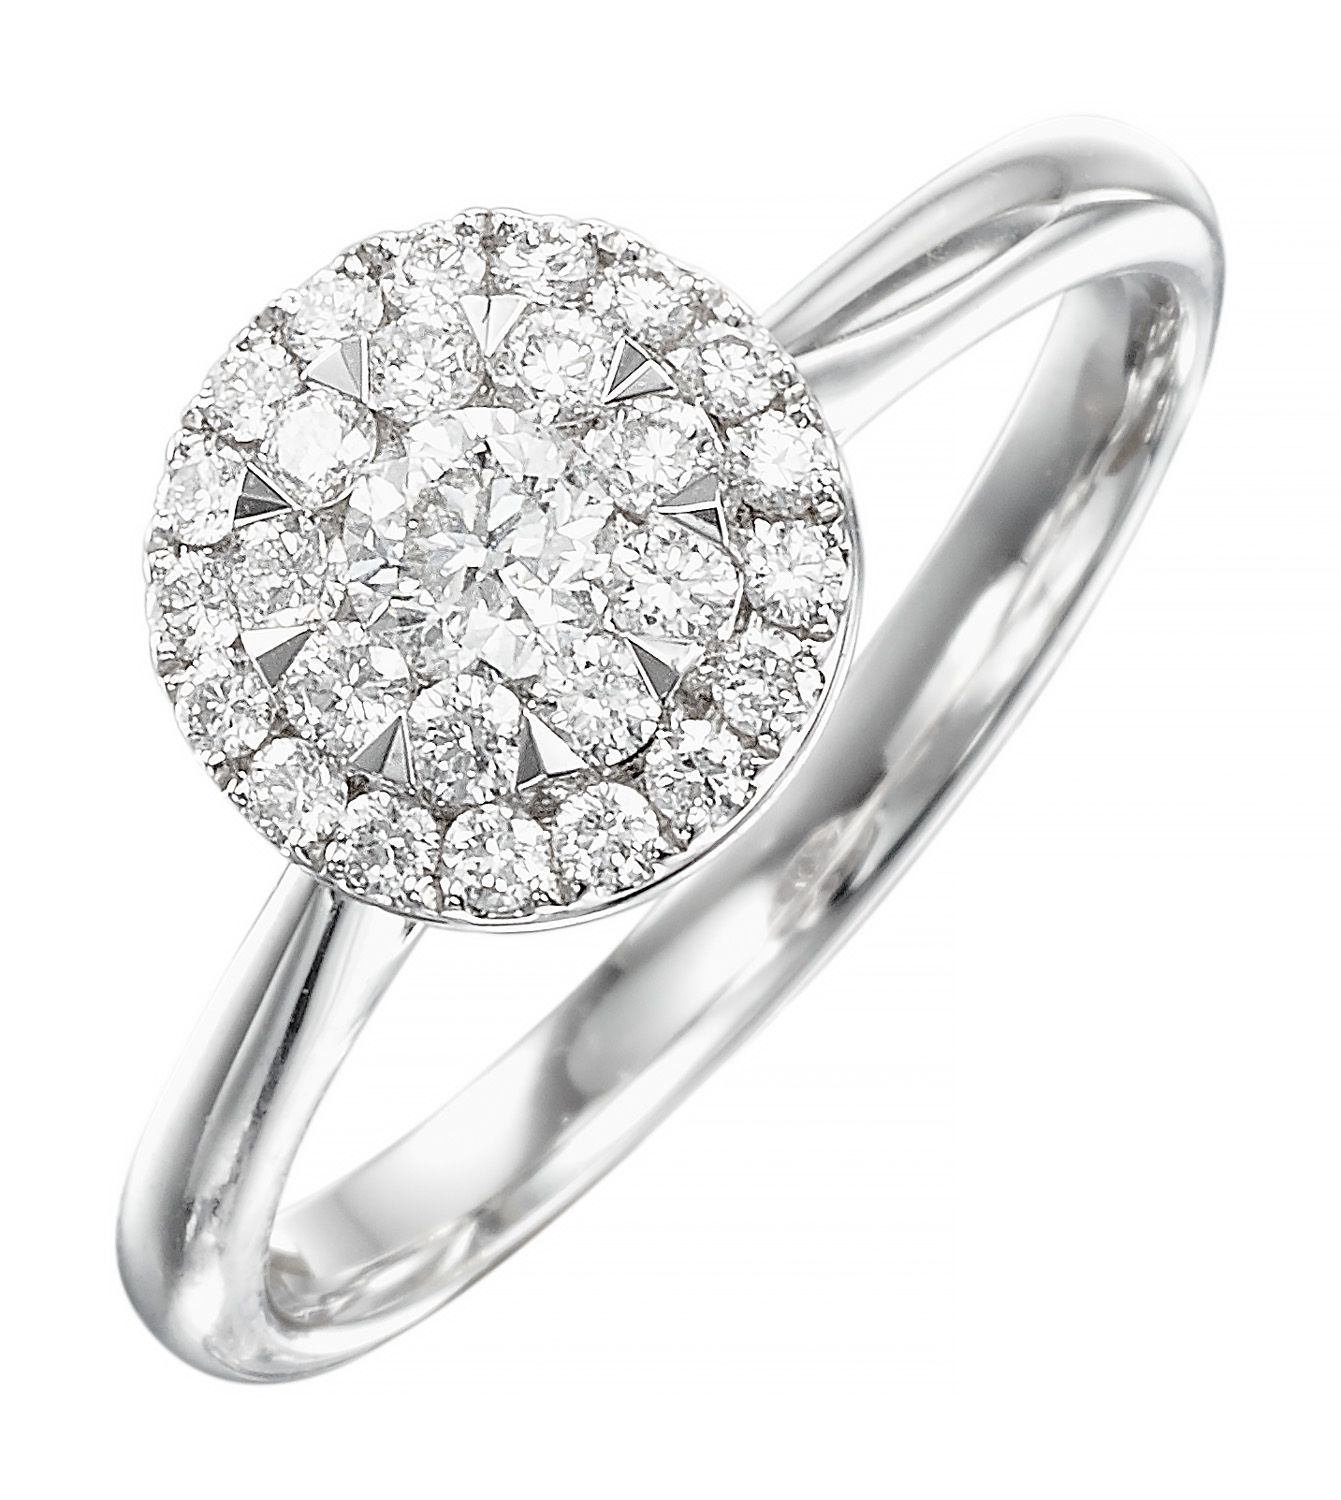 JOLIE BAGUE Nice white gold ring paved with brilliant cut diamonds